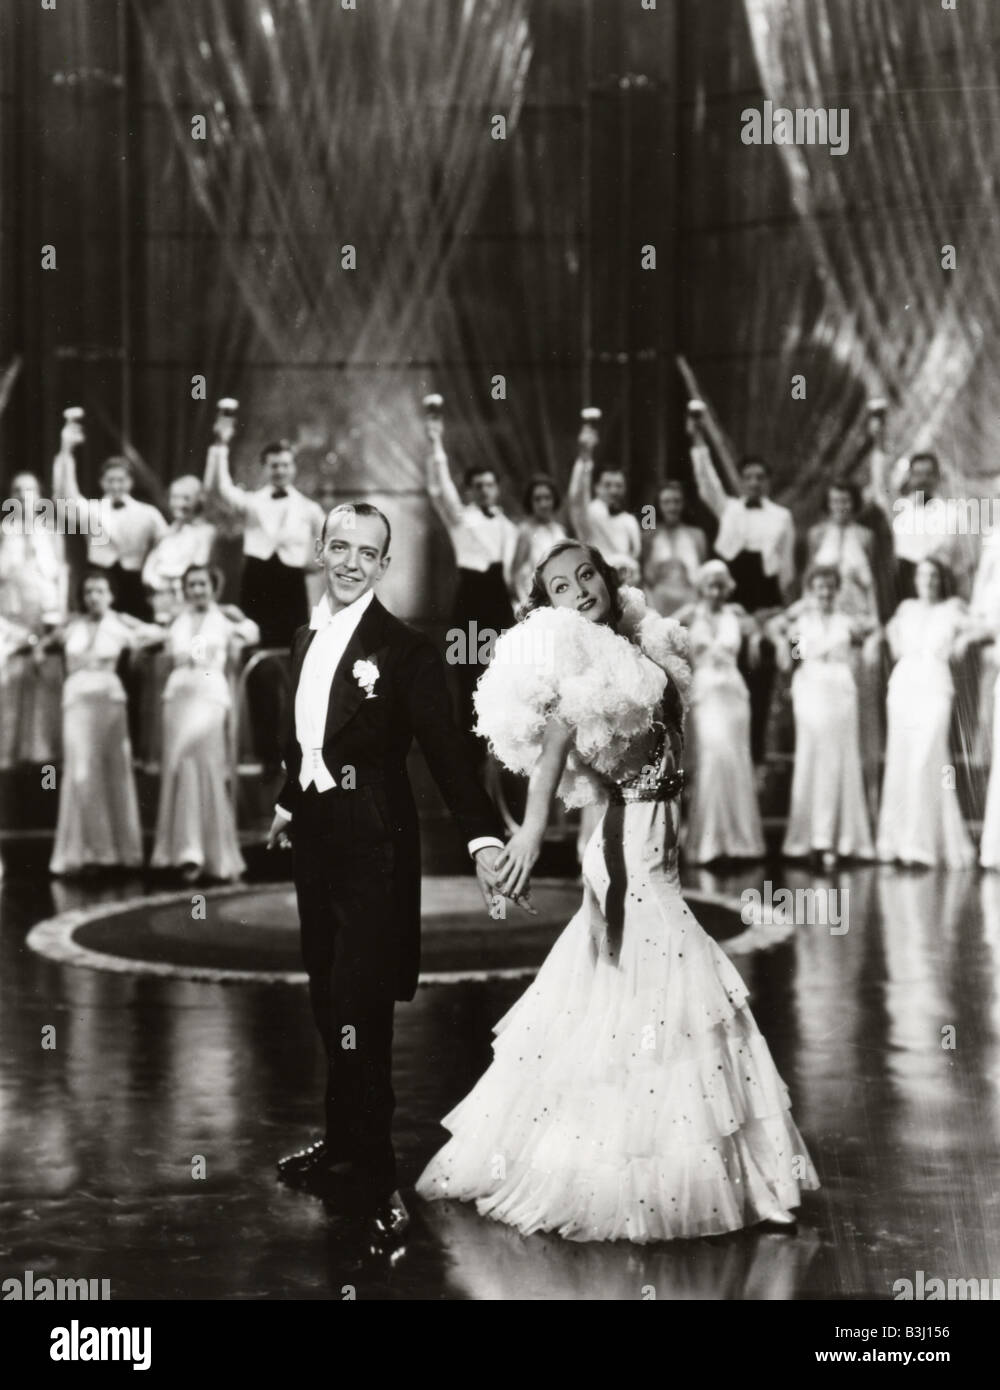 DANCING LADY 1933 MGM film avec Fred Astaire et Joan Crawford Banque D'Images